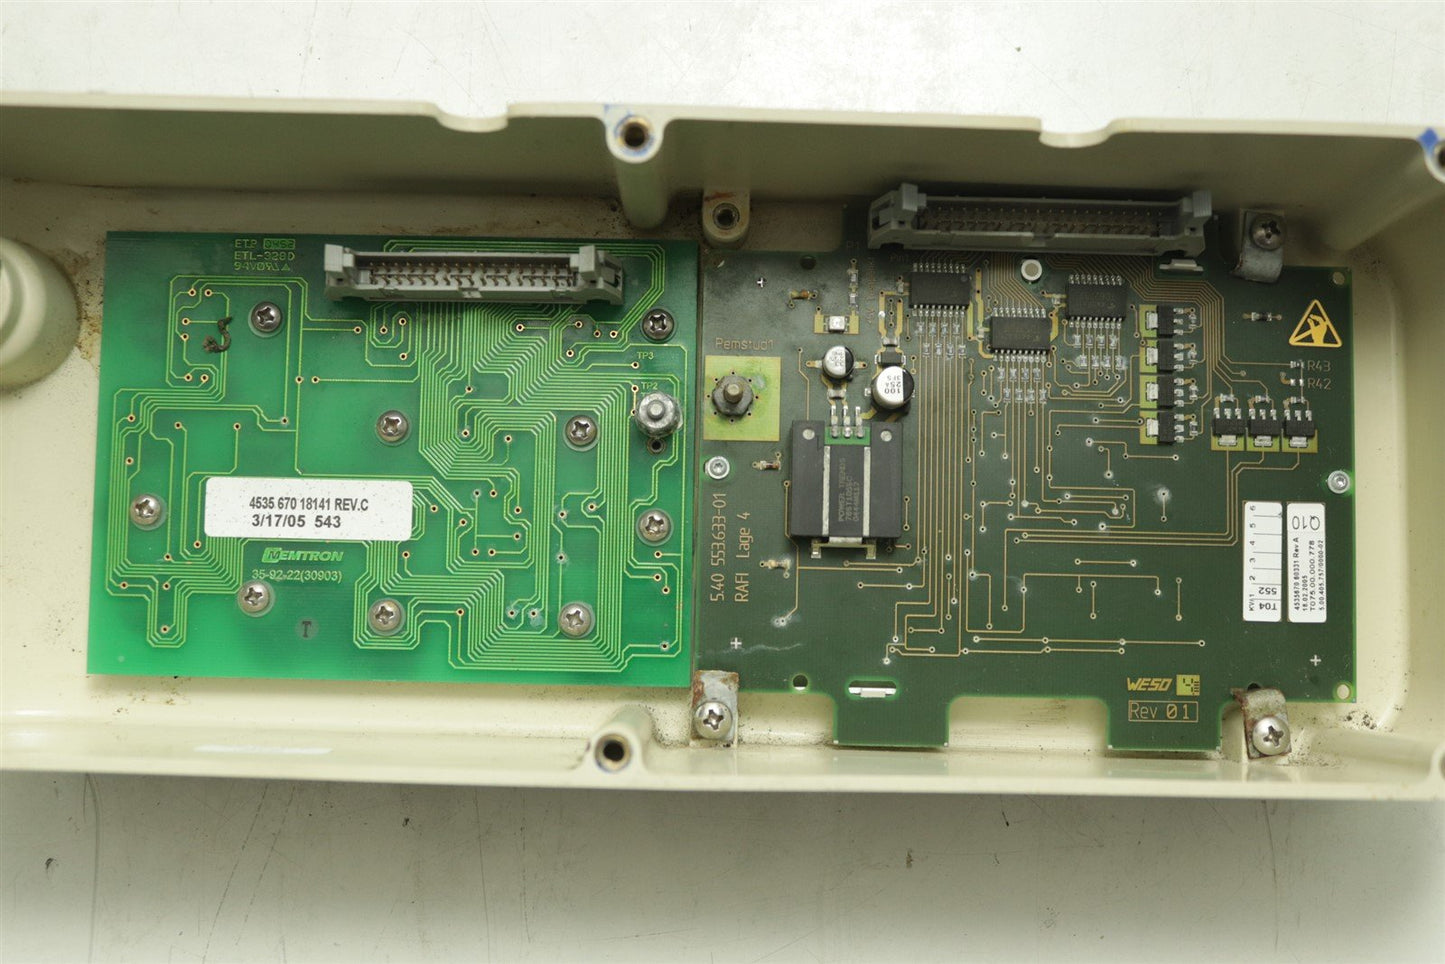 Philips CT Brilliance Assy LH Oper Panel and Display 453567069741